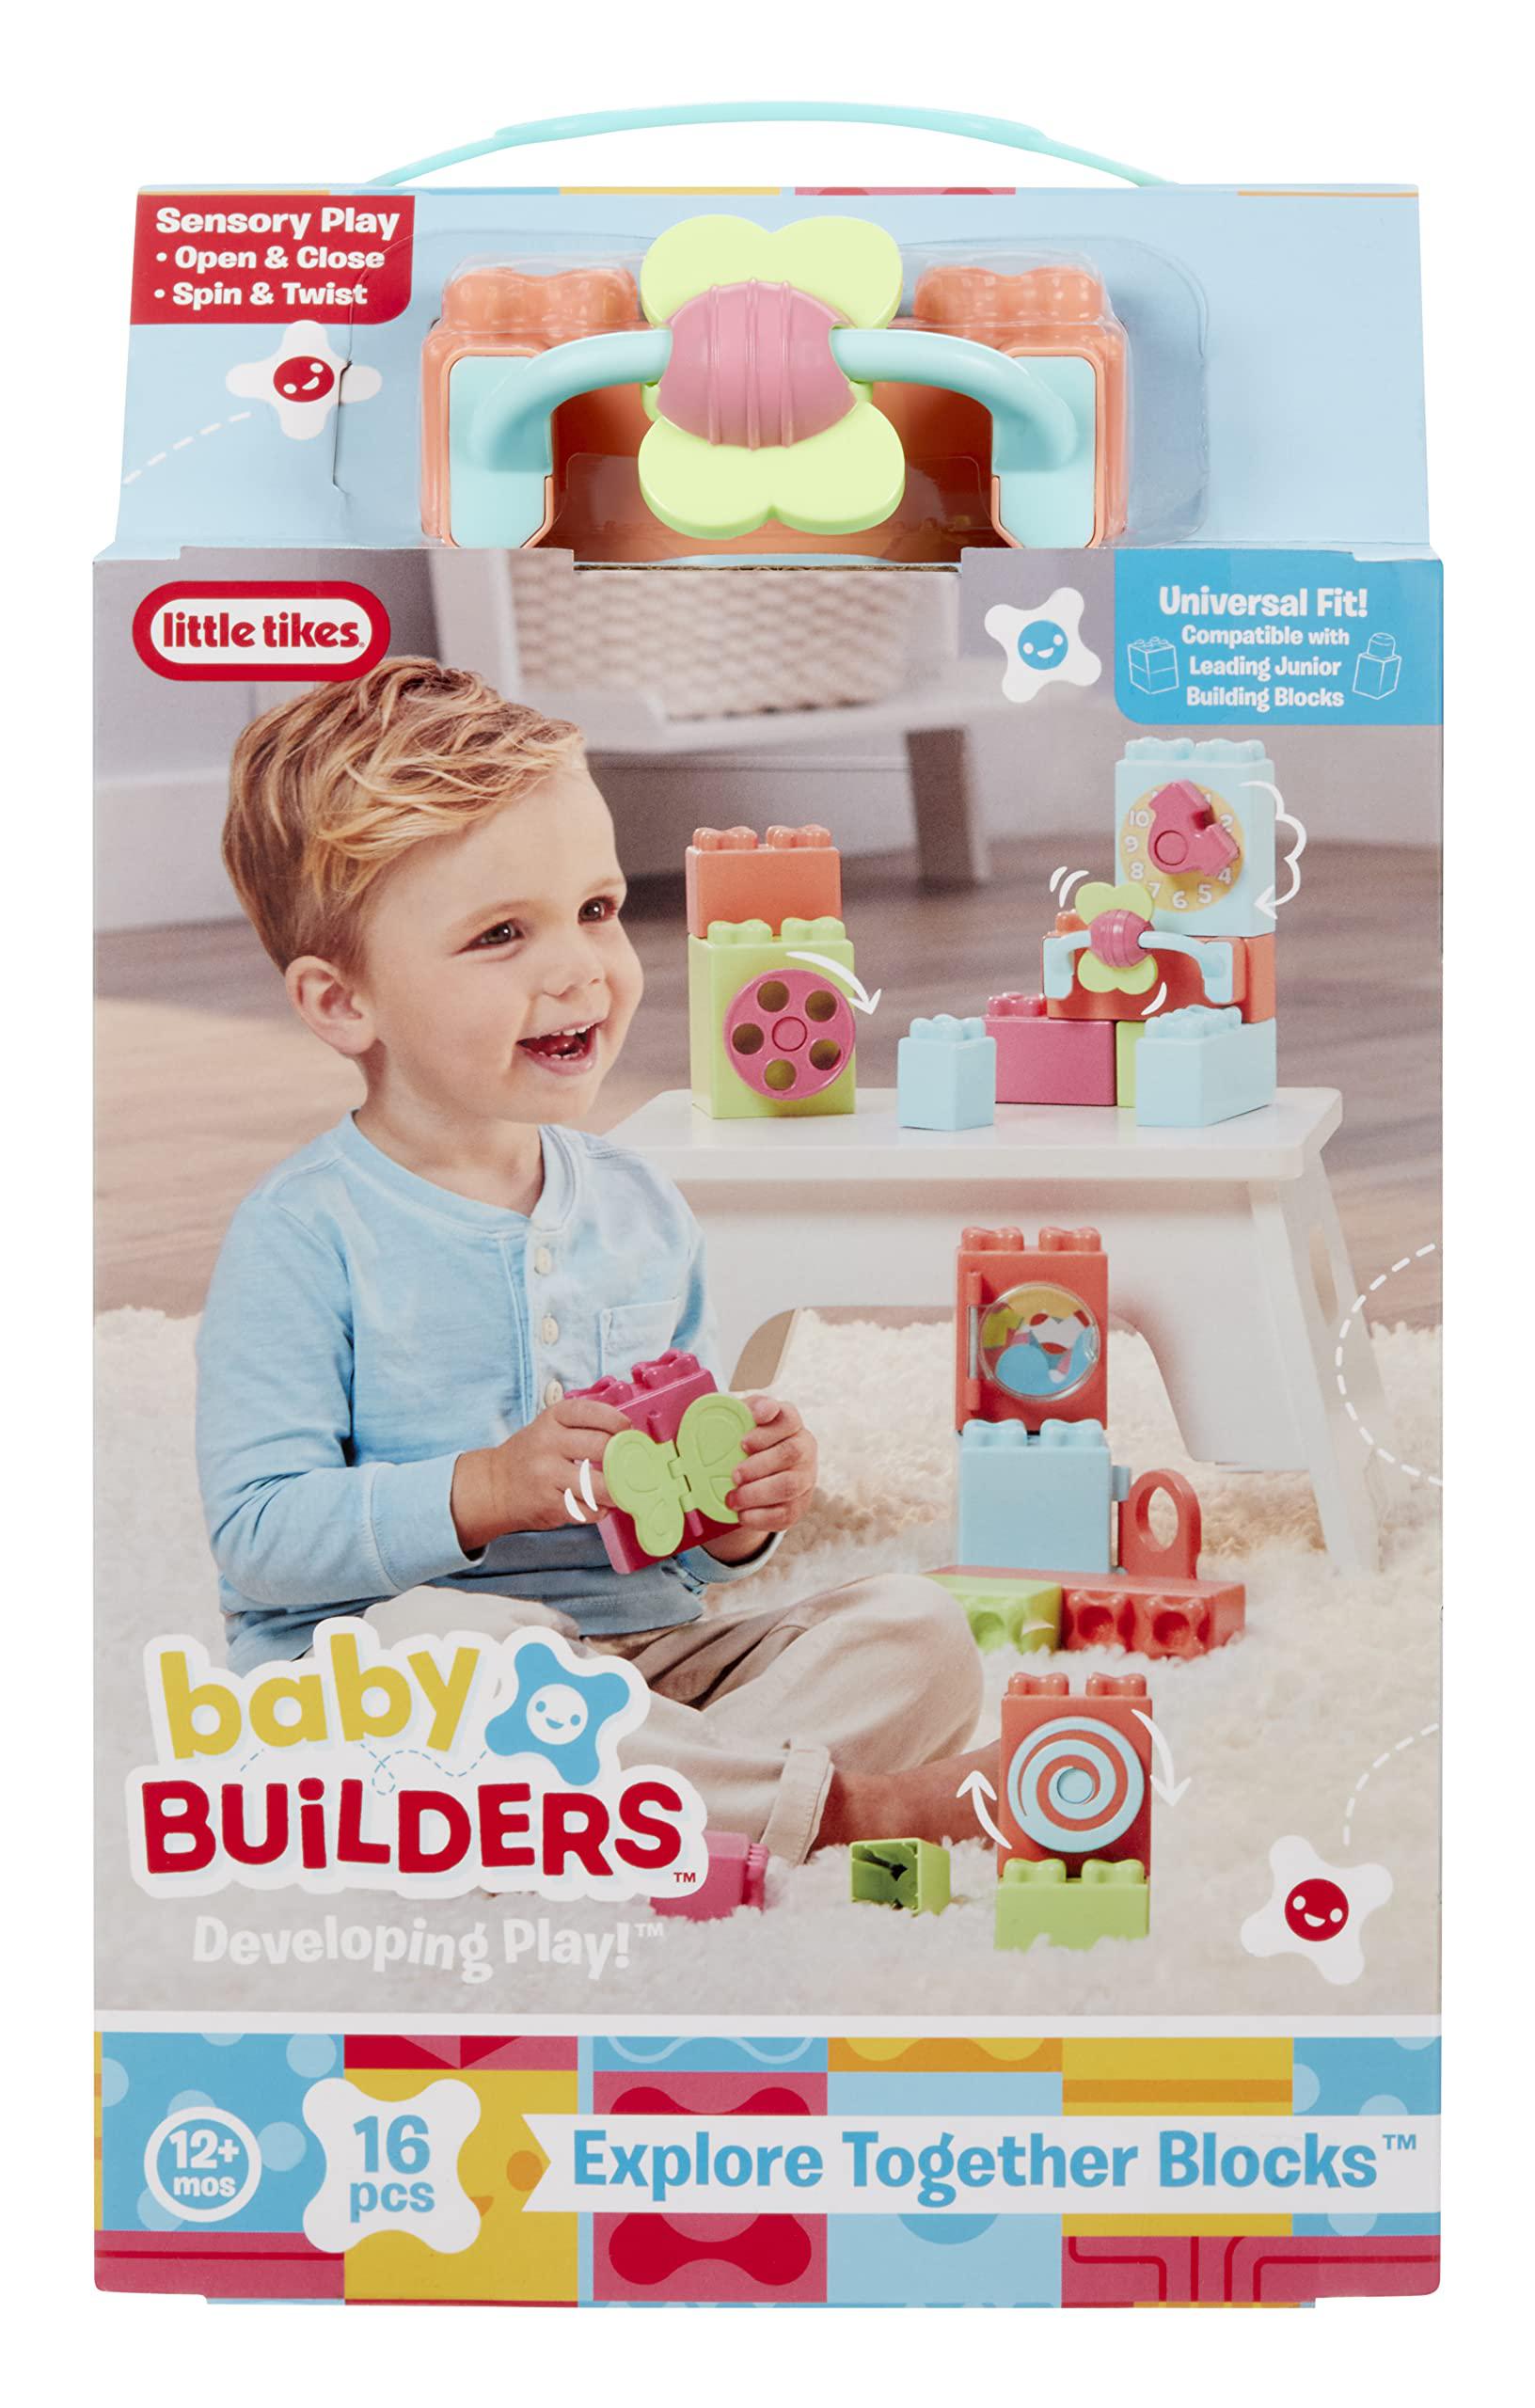 little tikes baby builders - explore together blocks first blocks for babies and toddlers, boys and girls, easy to connect, s